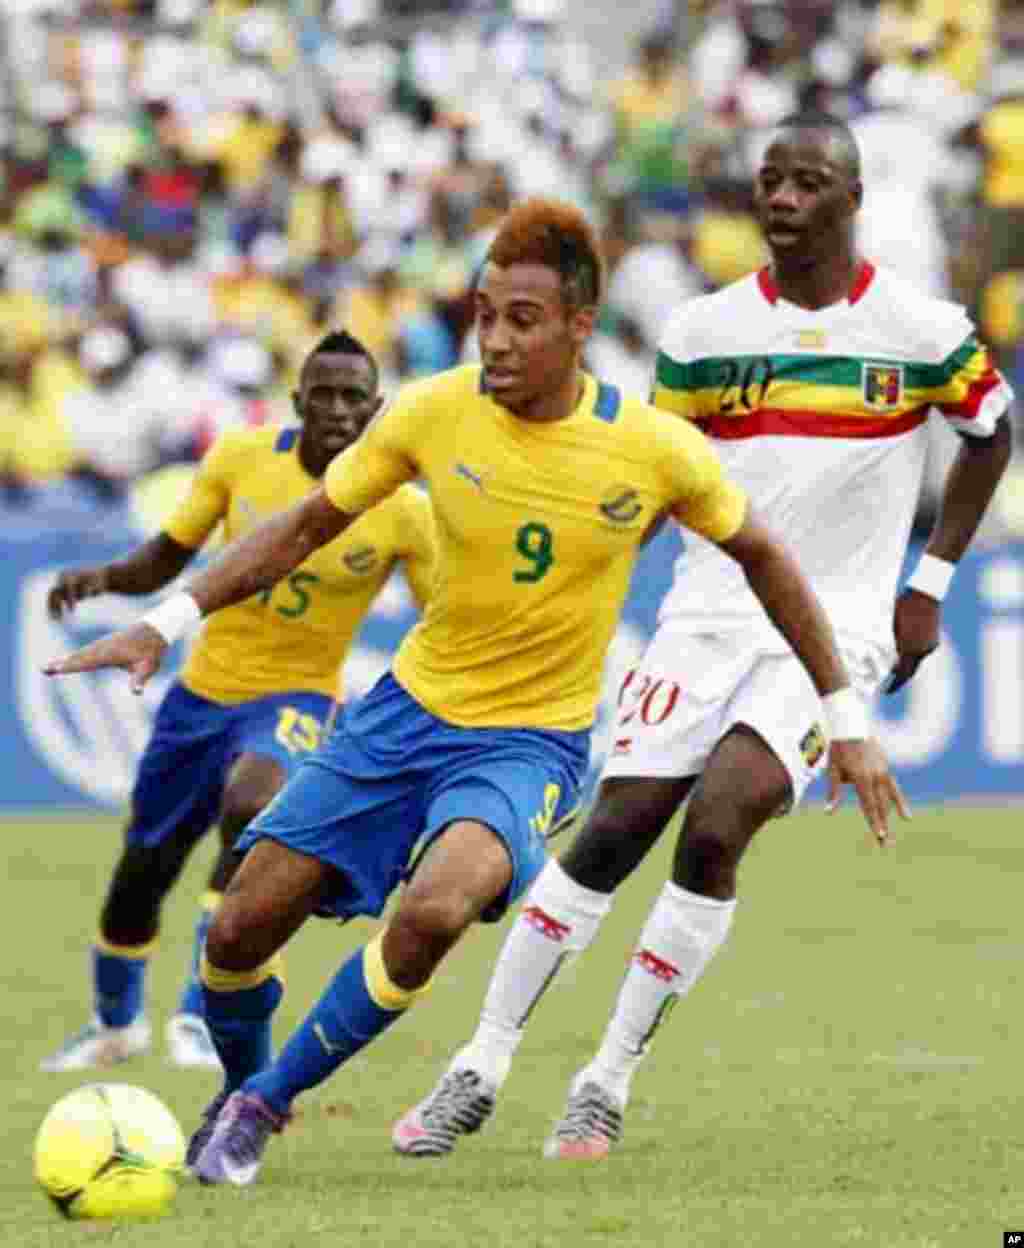 Gabon's Pierre Aubameyang (L) runs with the ball during their African Cup of Nations quarter-final soccer match against Mali at the Stade De L'Amitie Stadium in Gabon's capital Libreville, February 5, 2012.